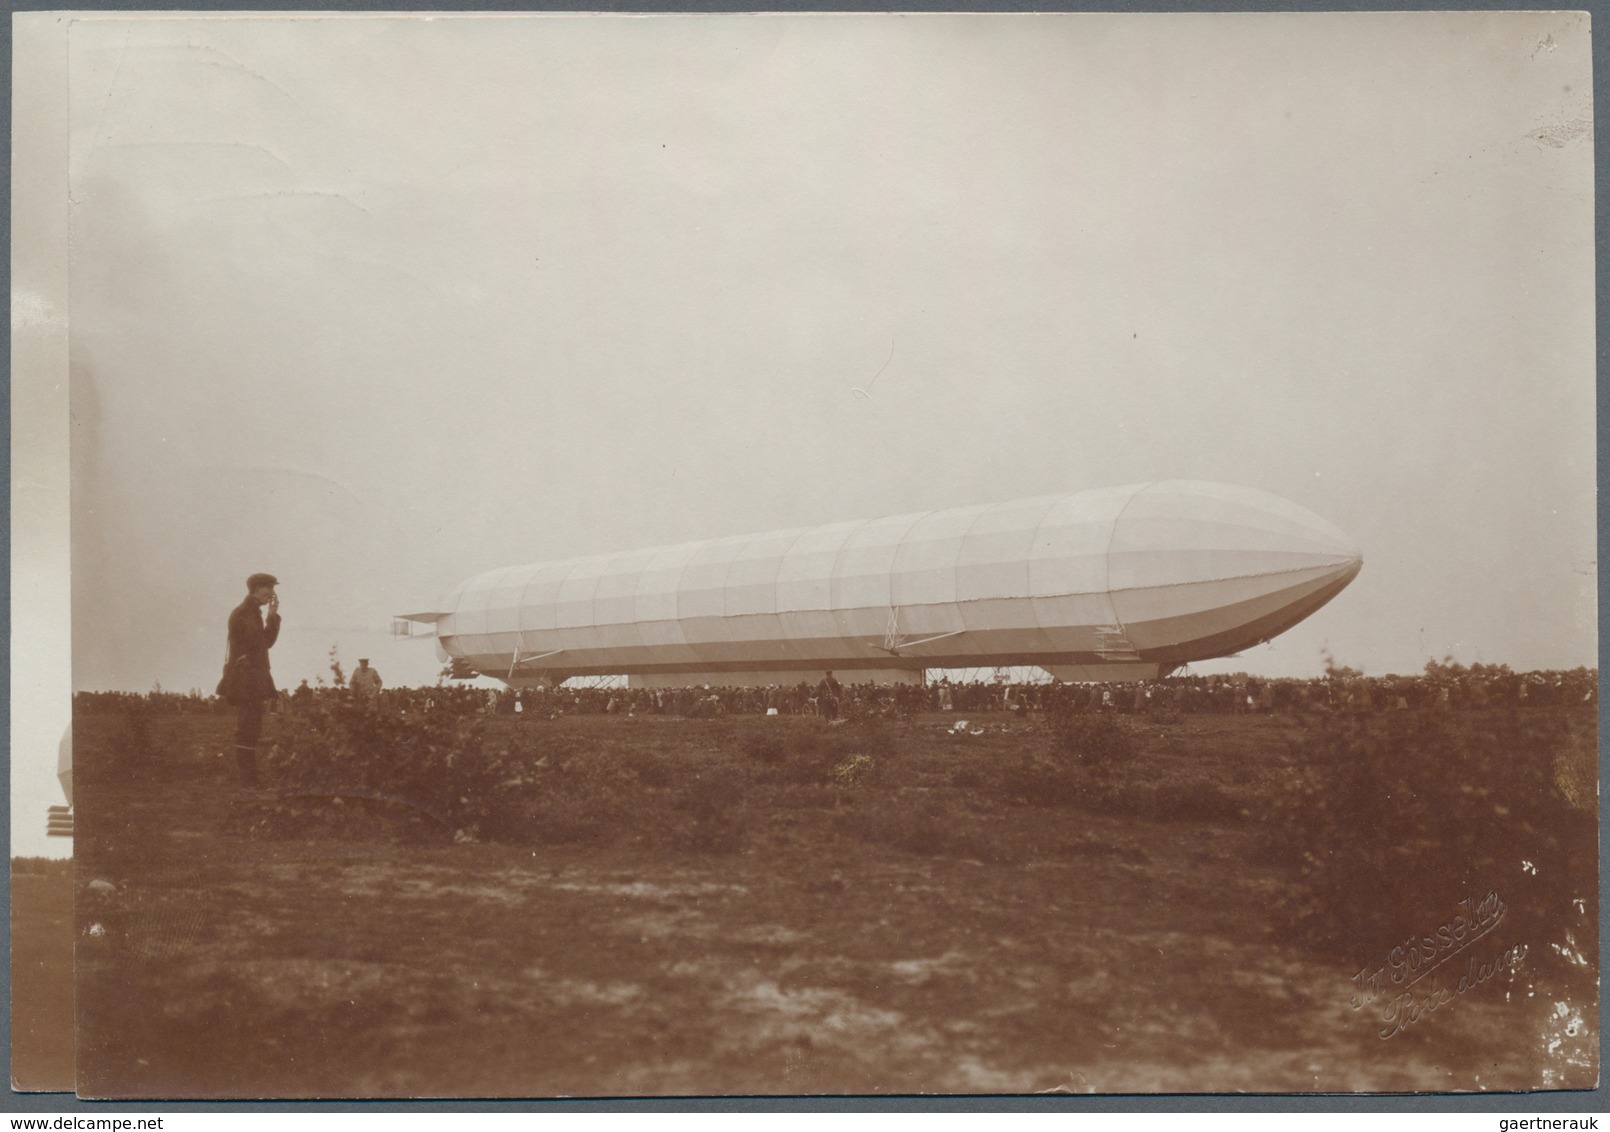 Thematik: Zeppelin / zeppelin: 1909. Group of five photographs, all pictured front and back, from th